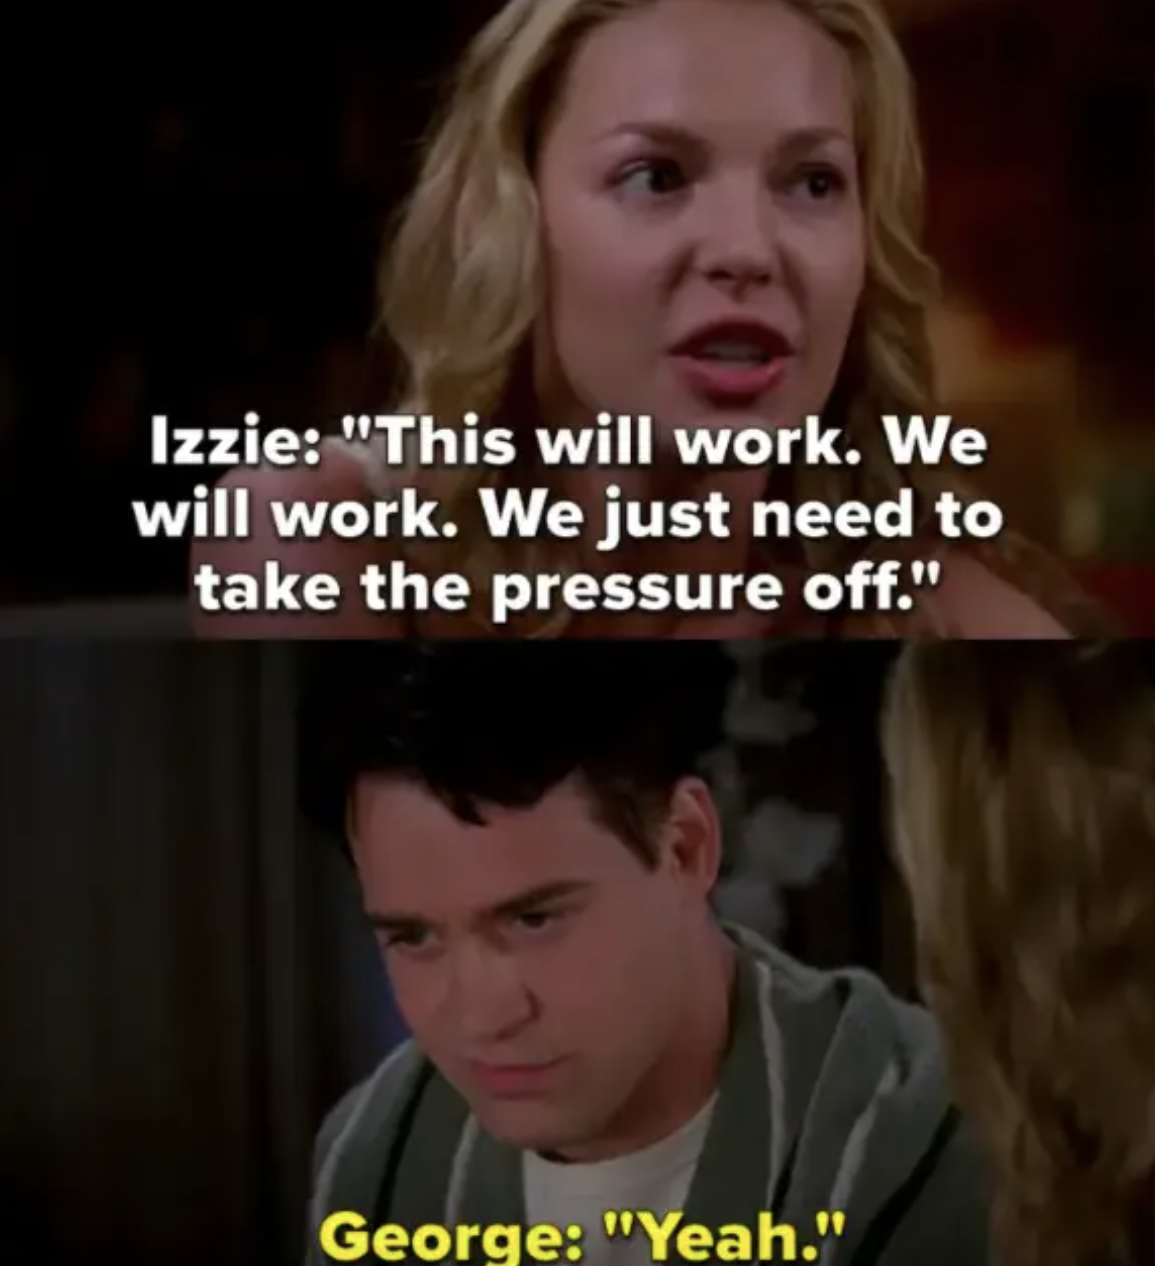 Izzie says they can make their relationship work if they just &quot;take the pressure off&quot;